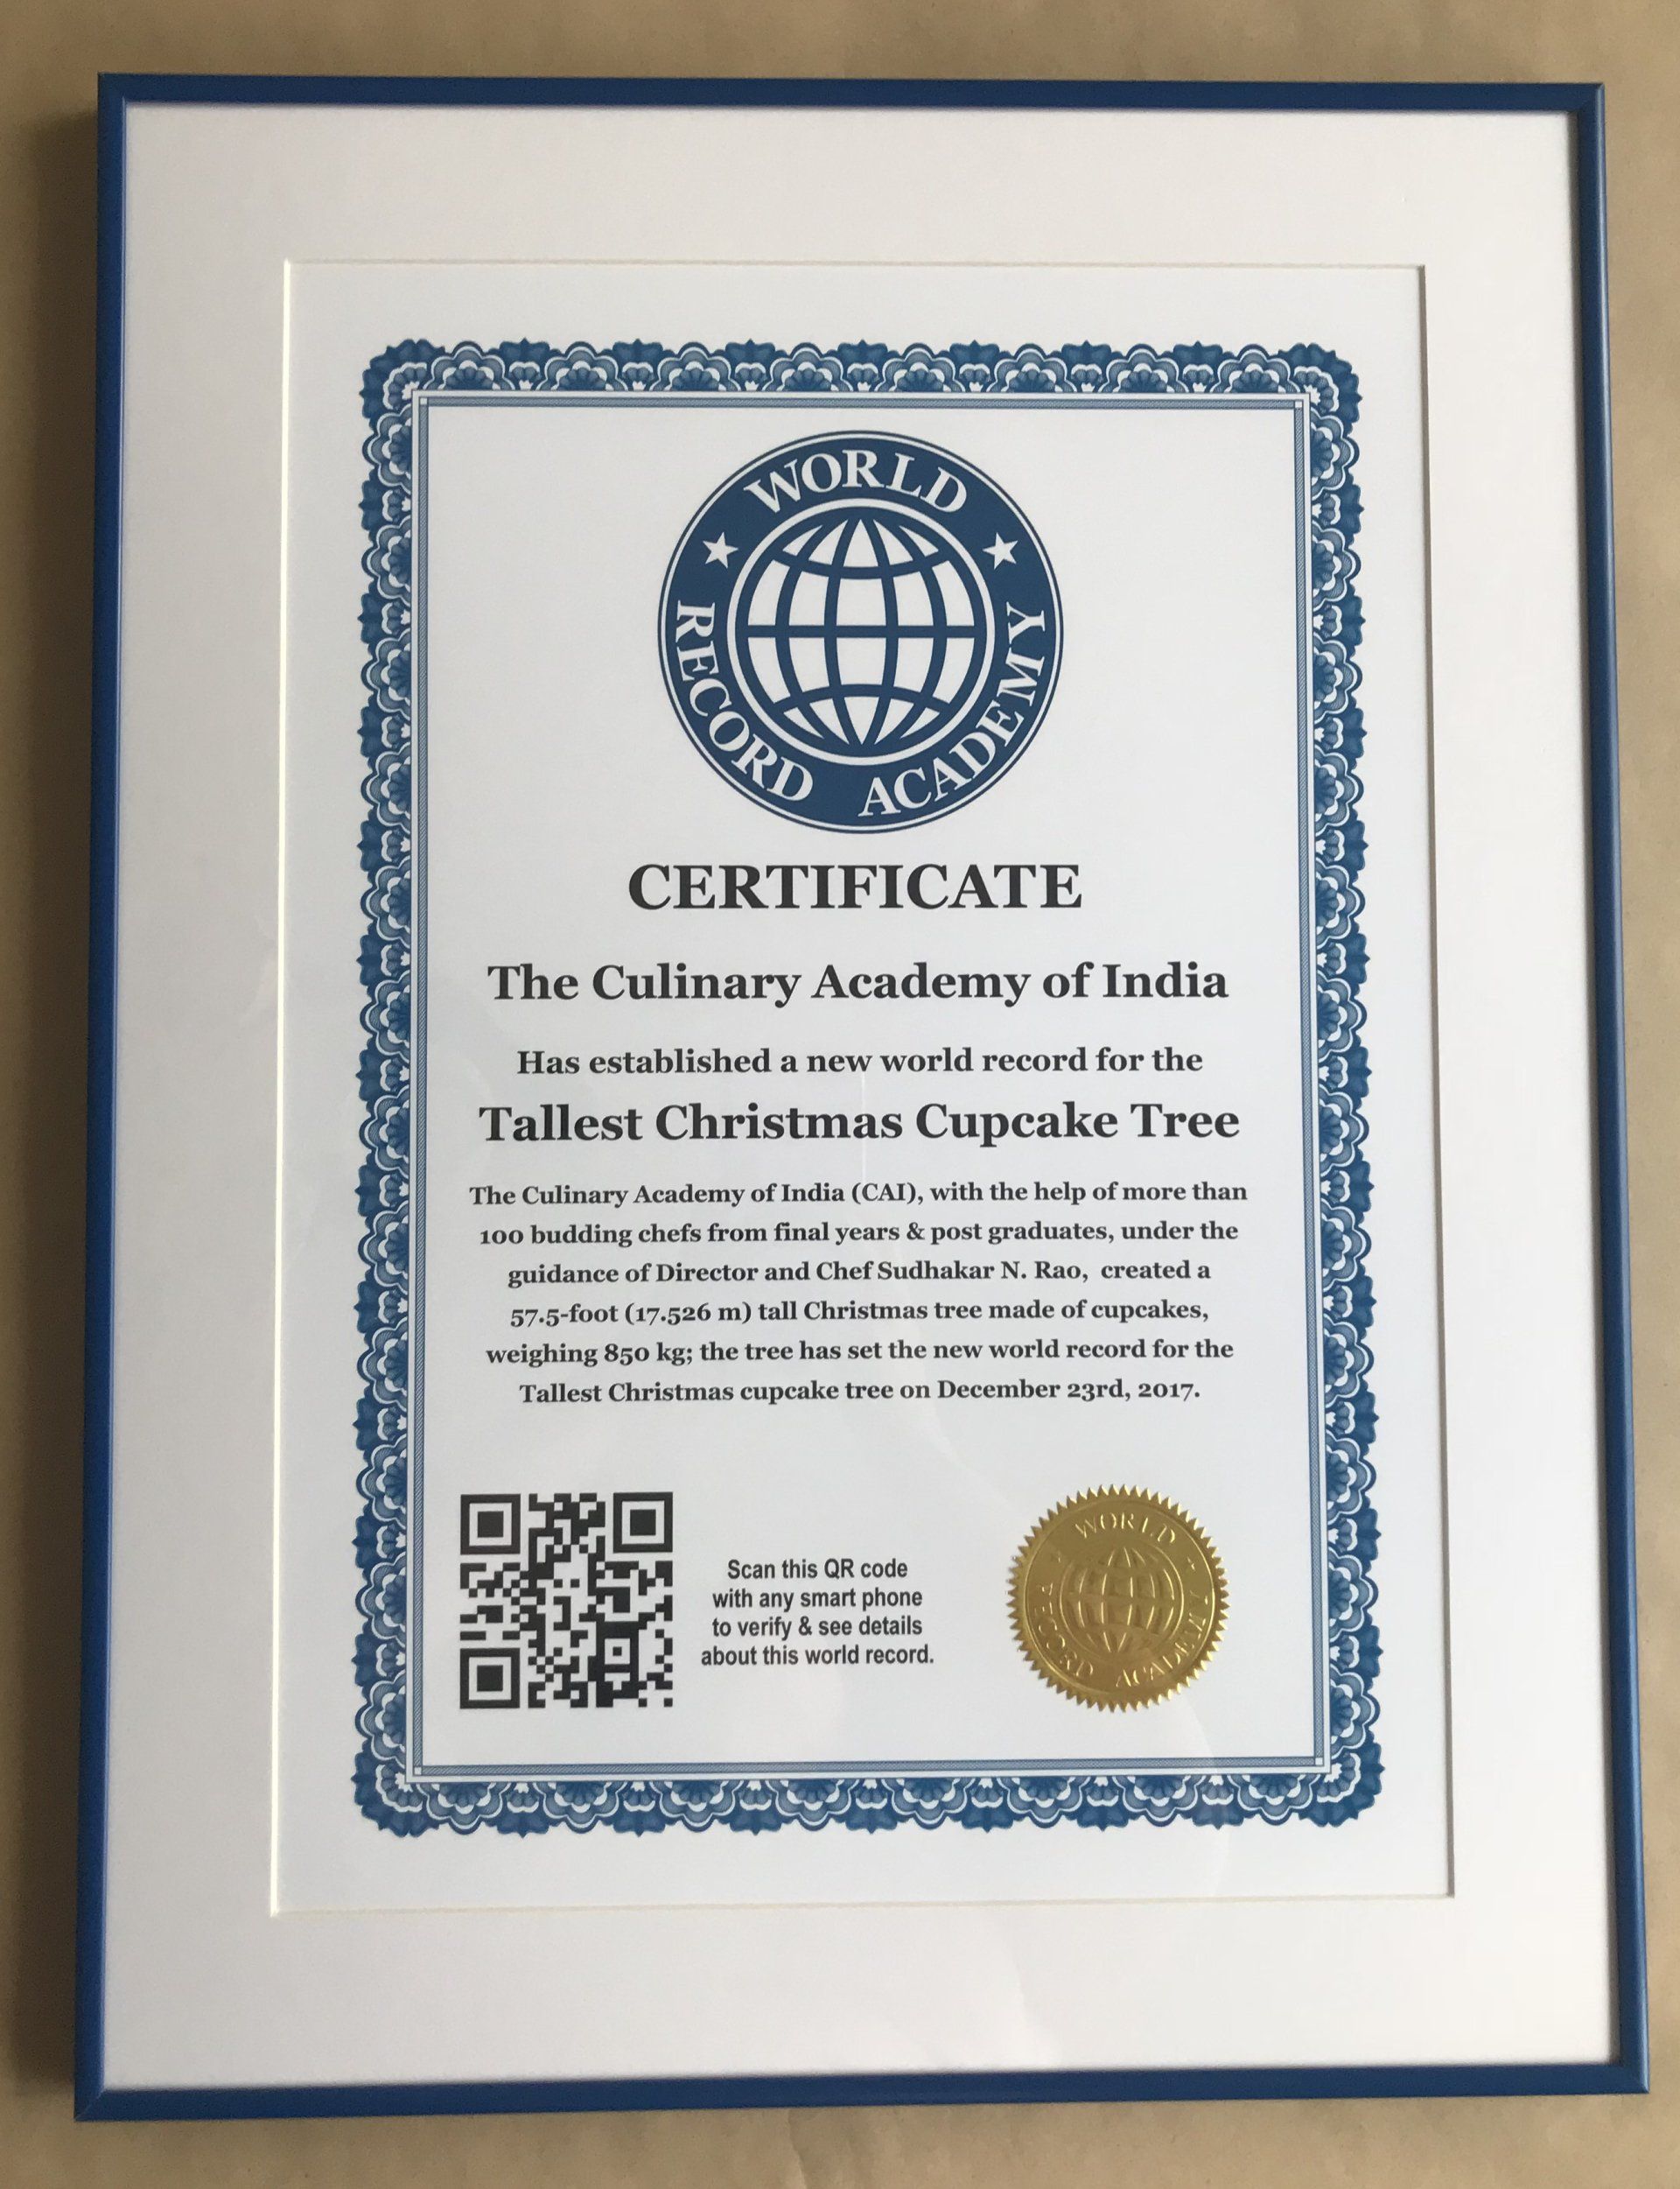 world record certificate for the Tallest Christmas cupcake tree.